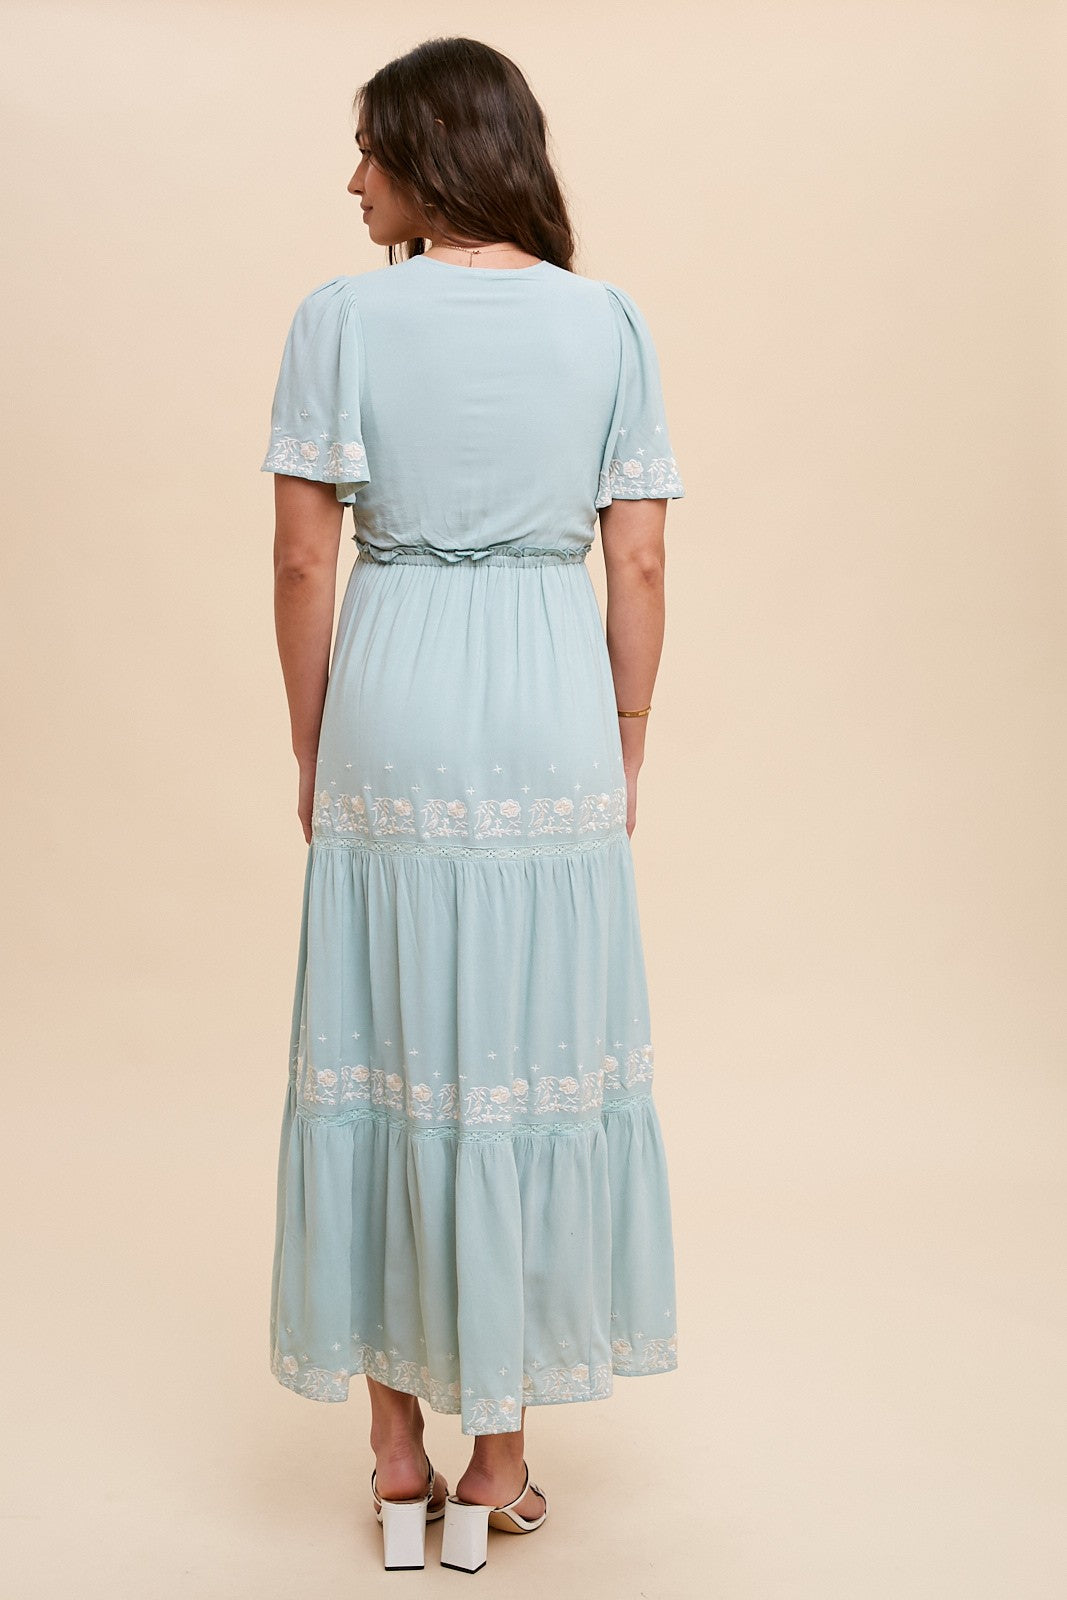 Mint Green Floral Embroidered Tiered Maxi Dress